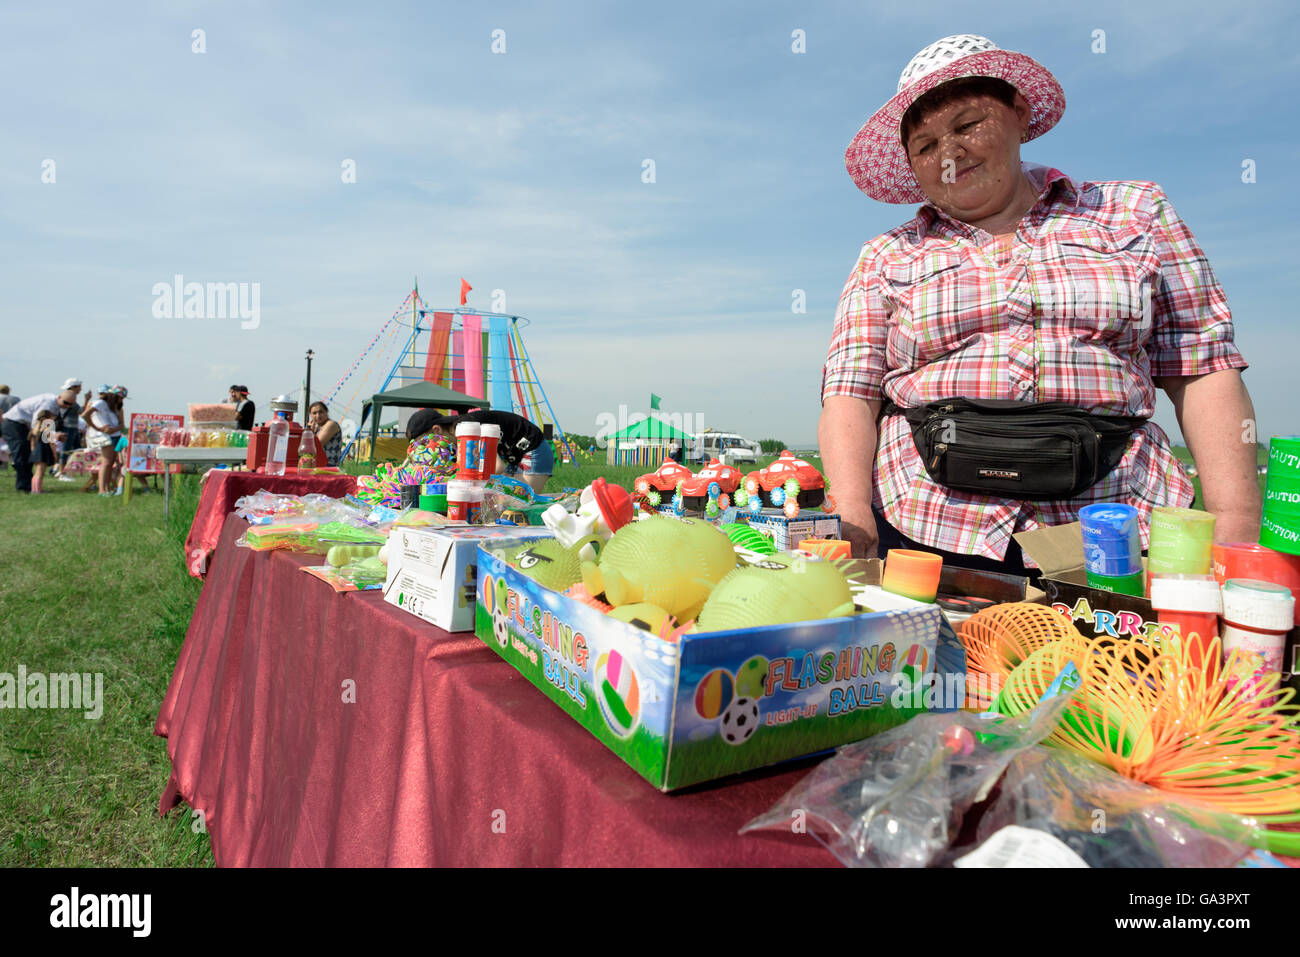 Woman selling toys for Children at an outdoor fair Stock Photo